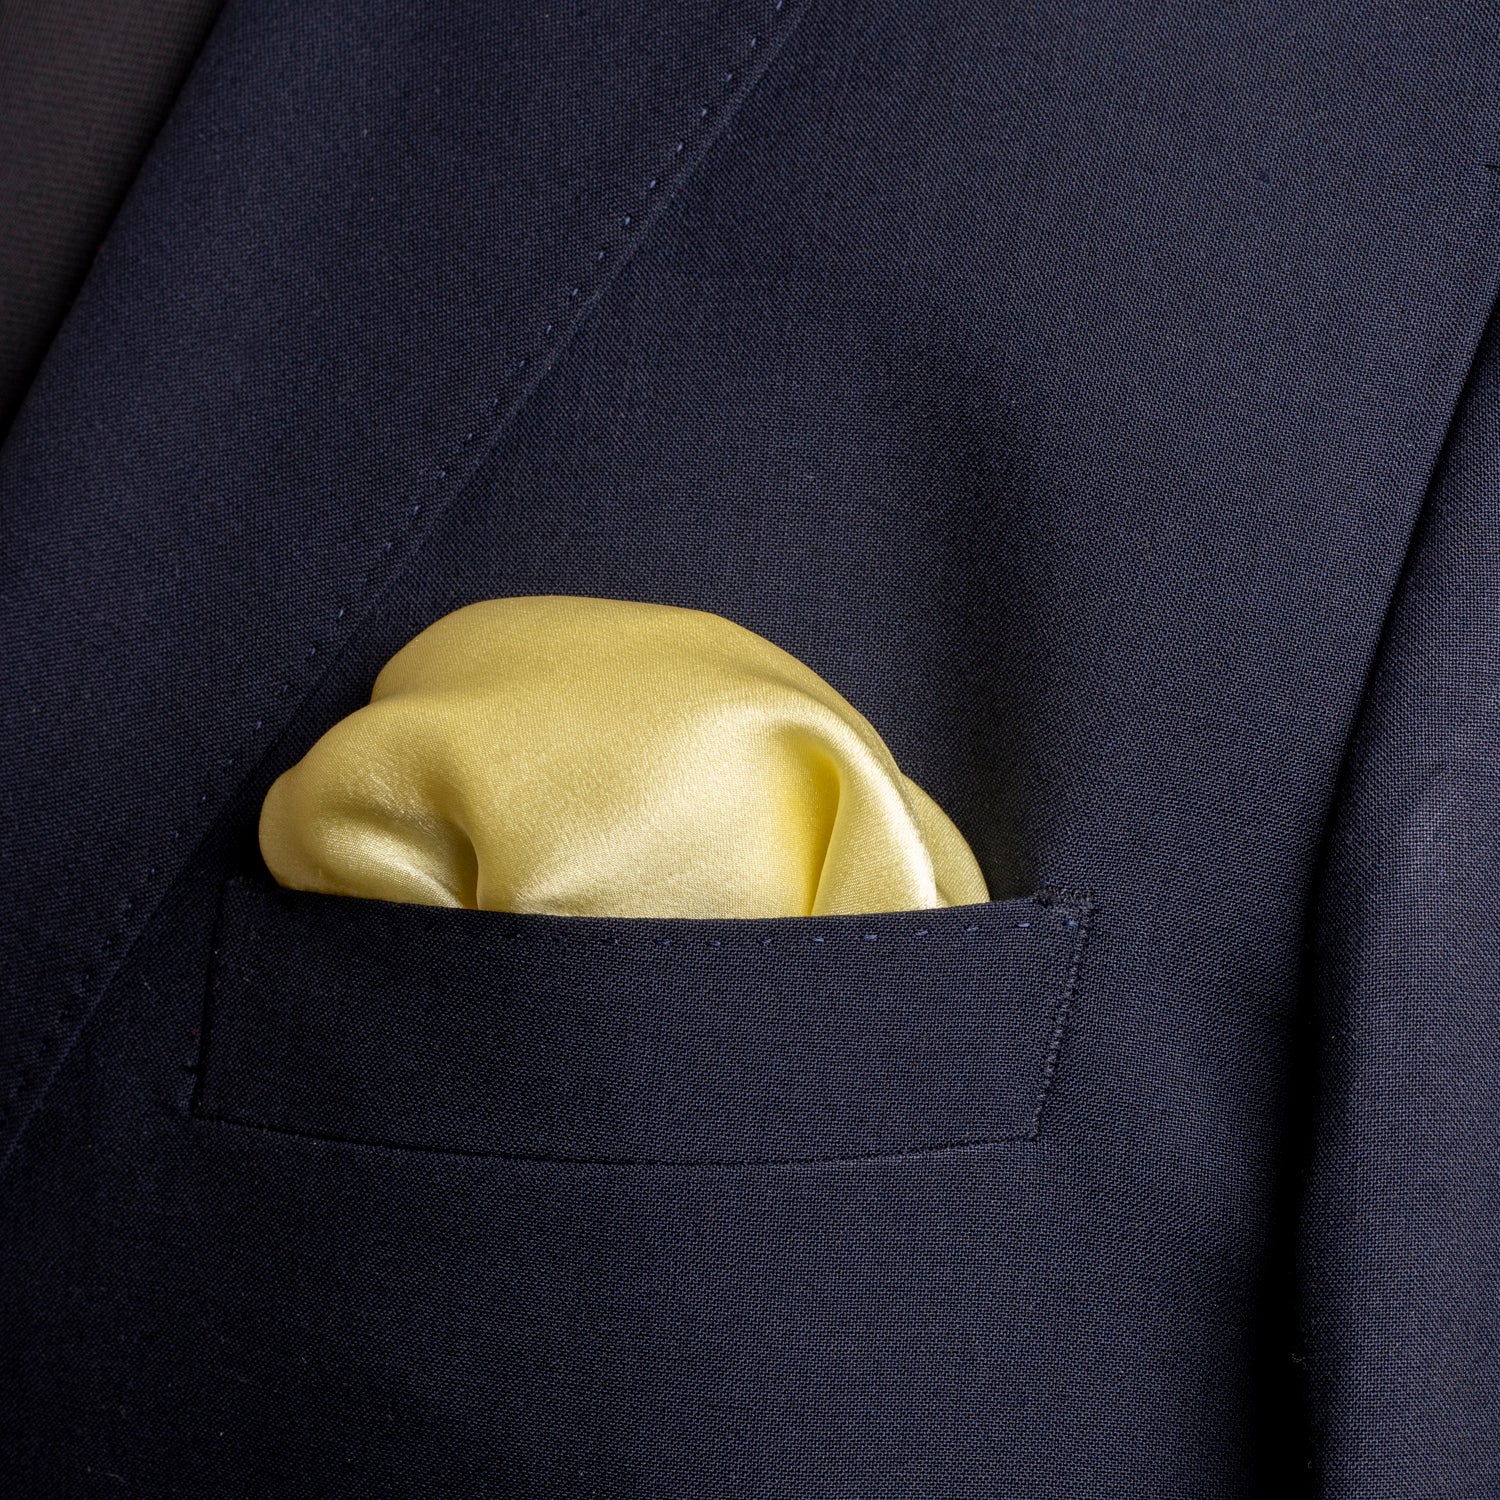 Chokore Lime Satin Silk pocket square from the Solids Line